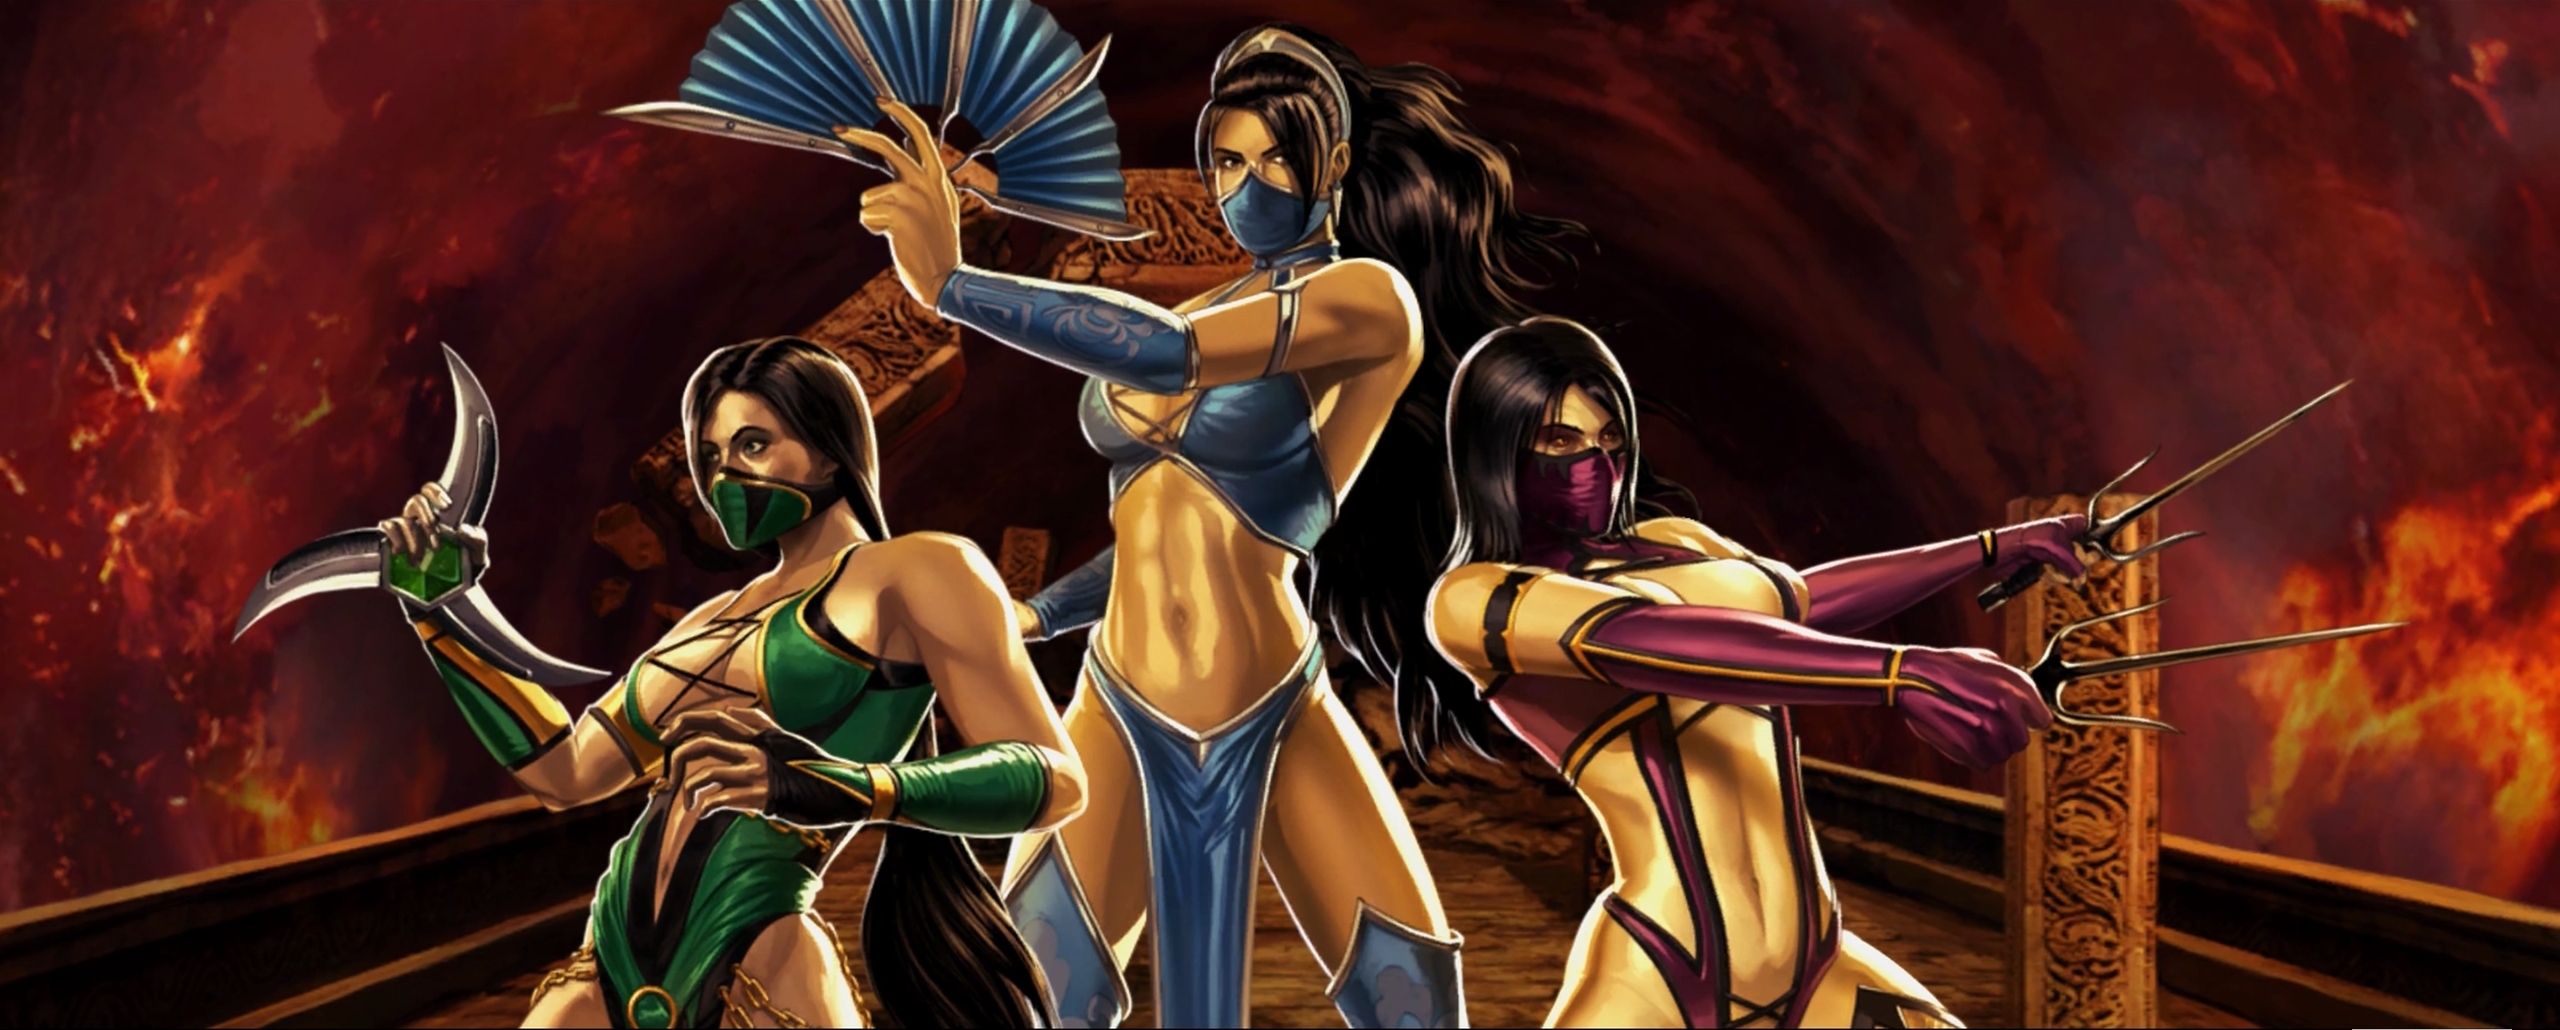 Mortal Kombat': New Shots of Mileena and Kabal Featured in Latest TV Spots  - Bloody Disgusting